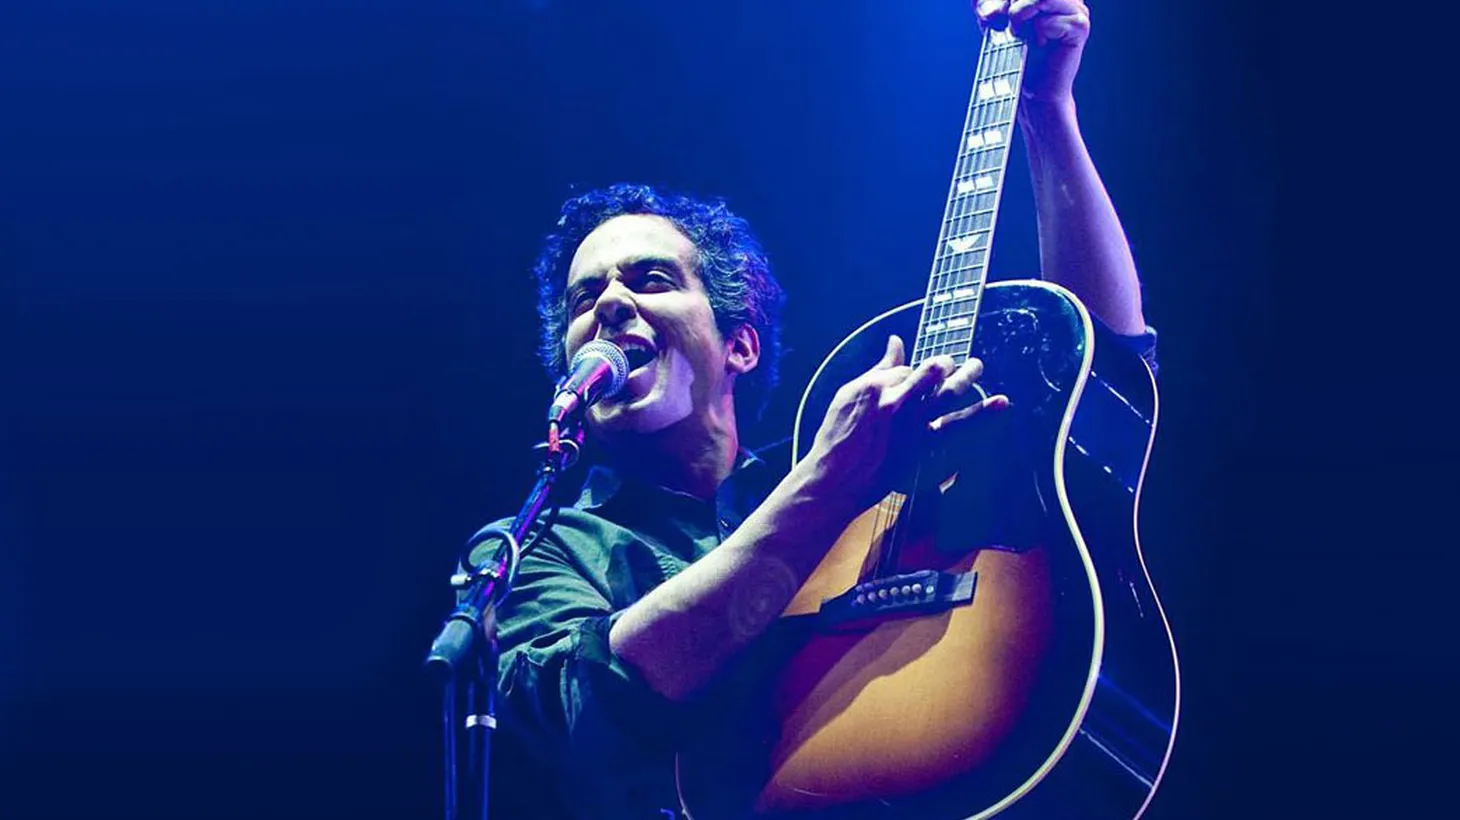 Half of She & Him and super talented songwriter and guitarist in his own right M. Ward returns to Morning Becomes Eclectic for the LP reissue of his 2005 album Transistor Radio, where he explored childhood memories of utopian radio.